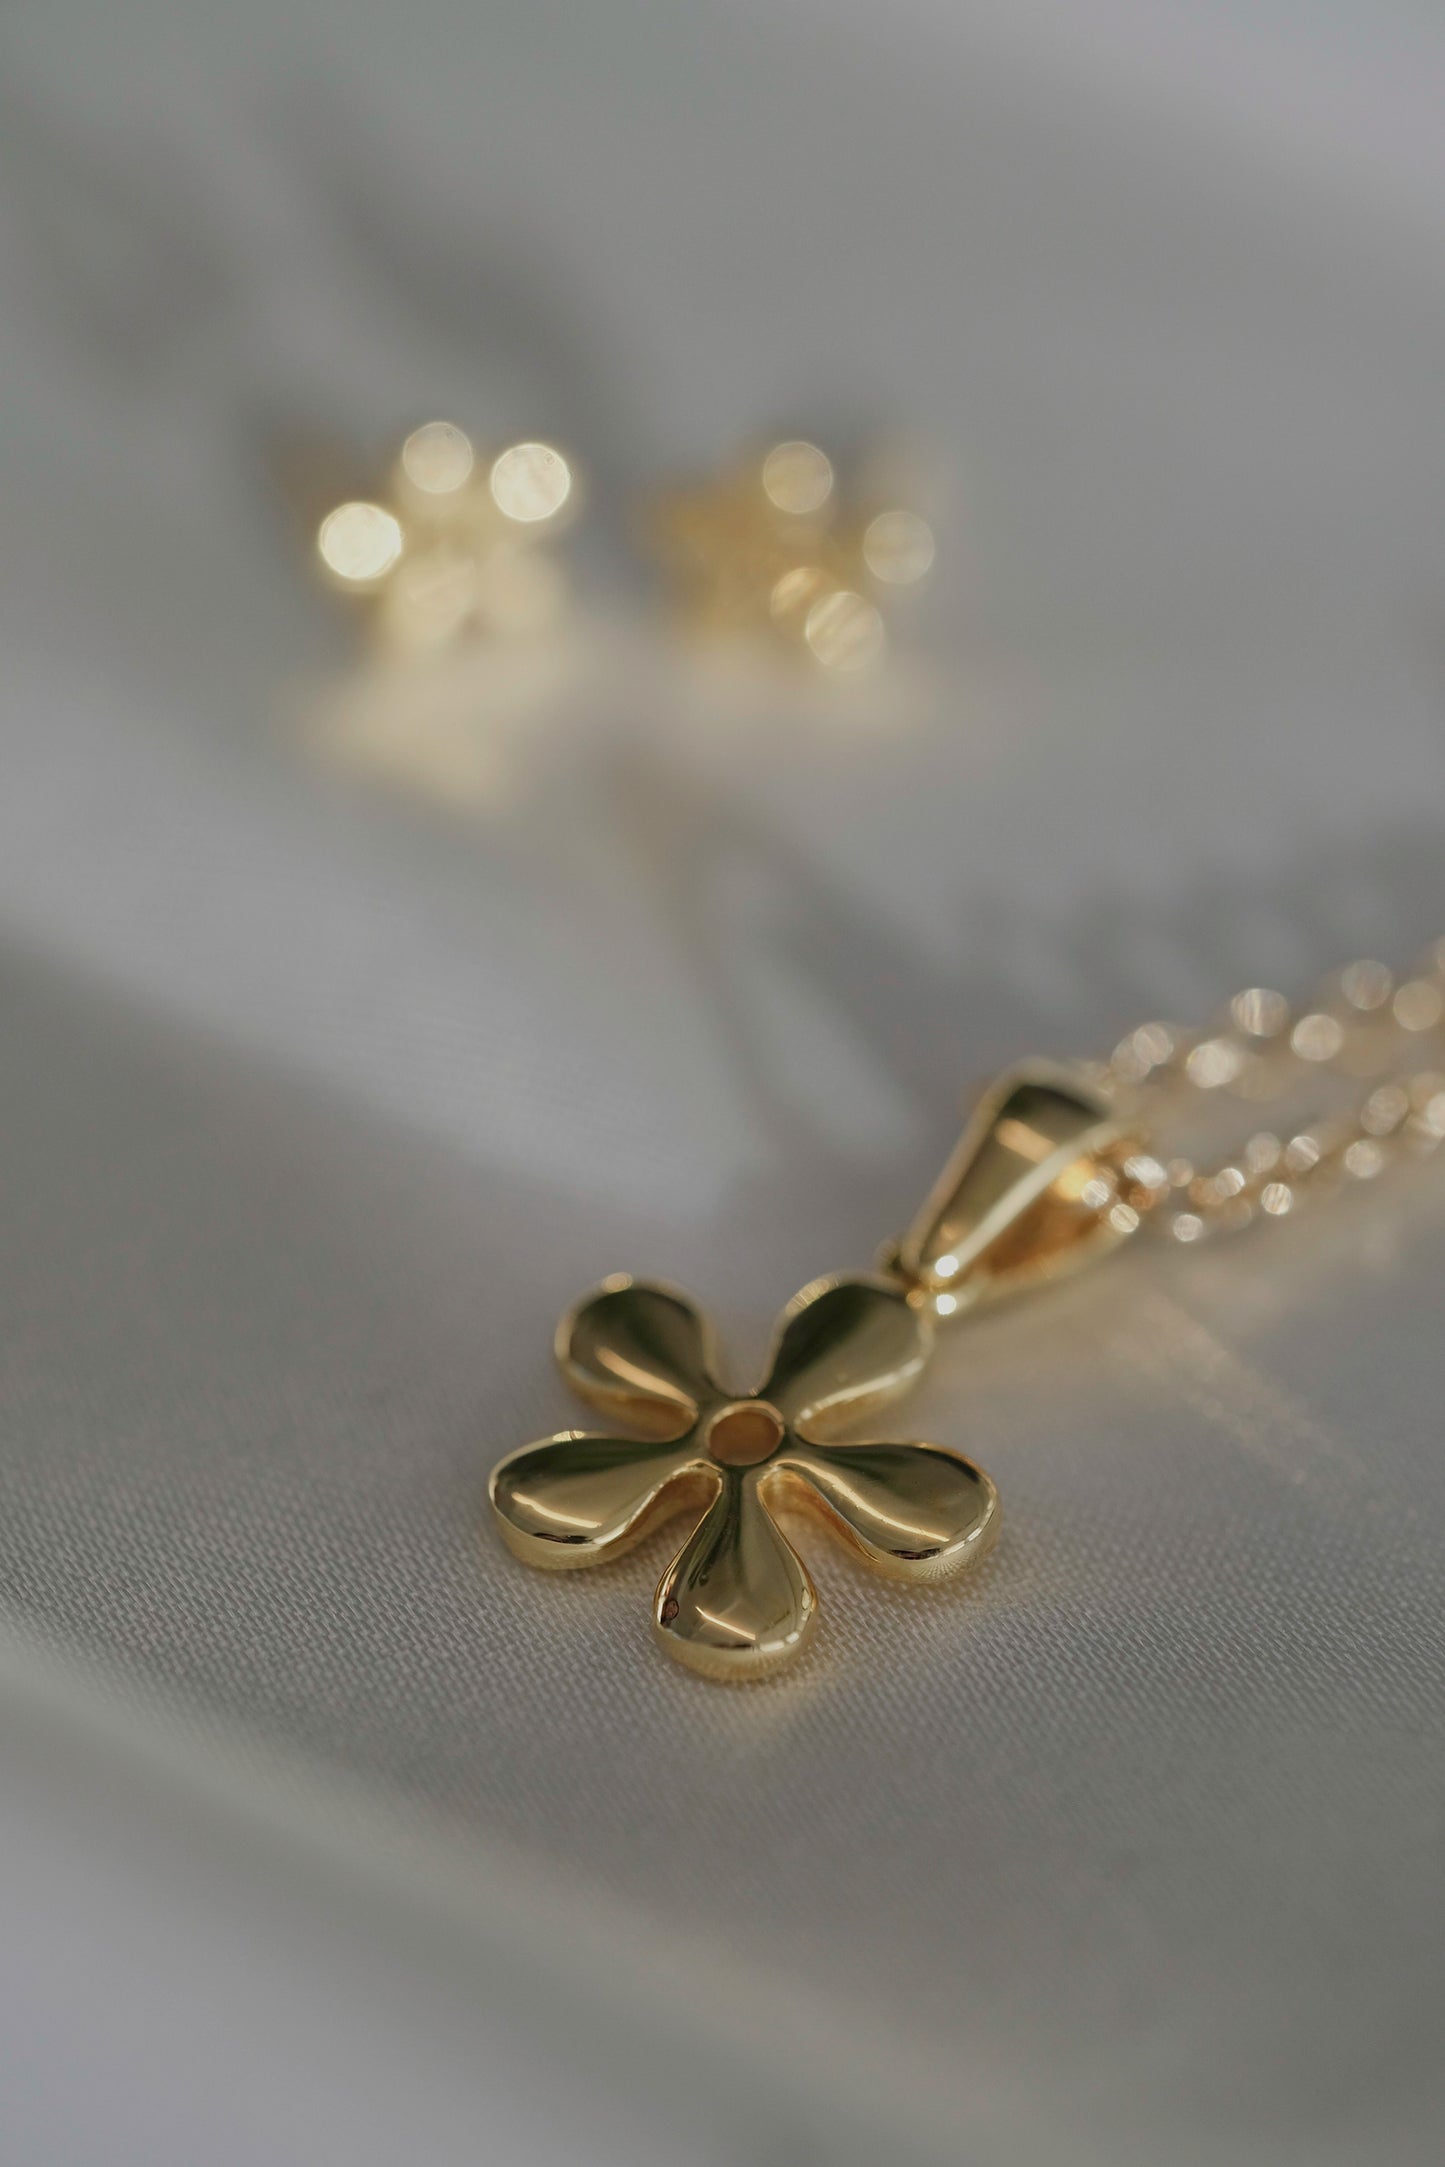 70's daisy charm gold-filled sterling silver